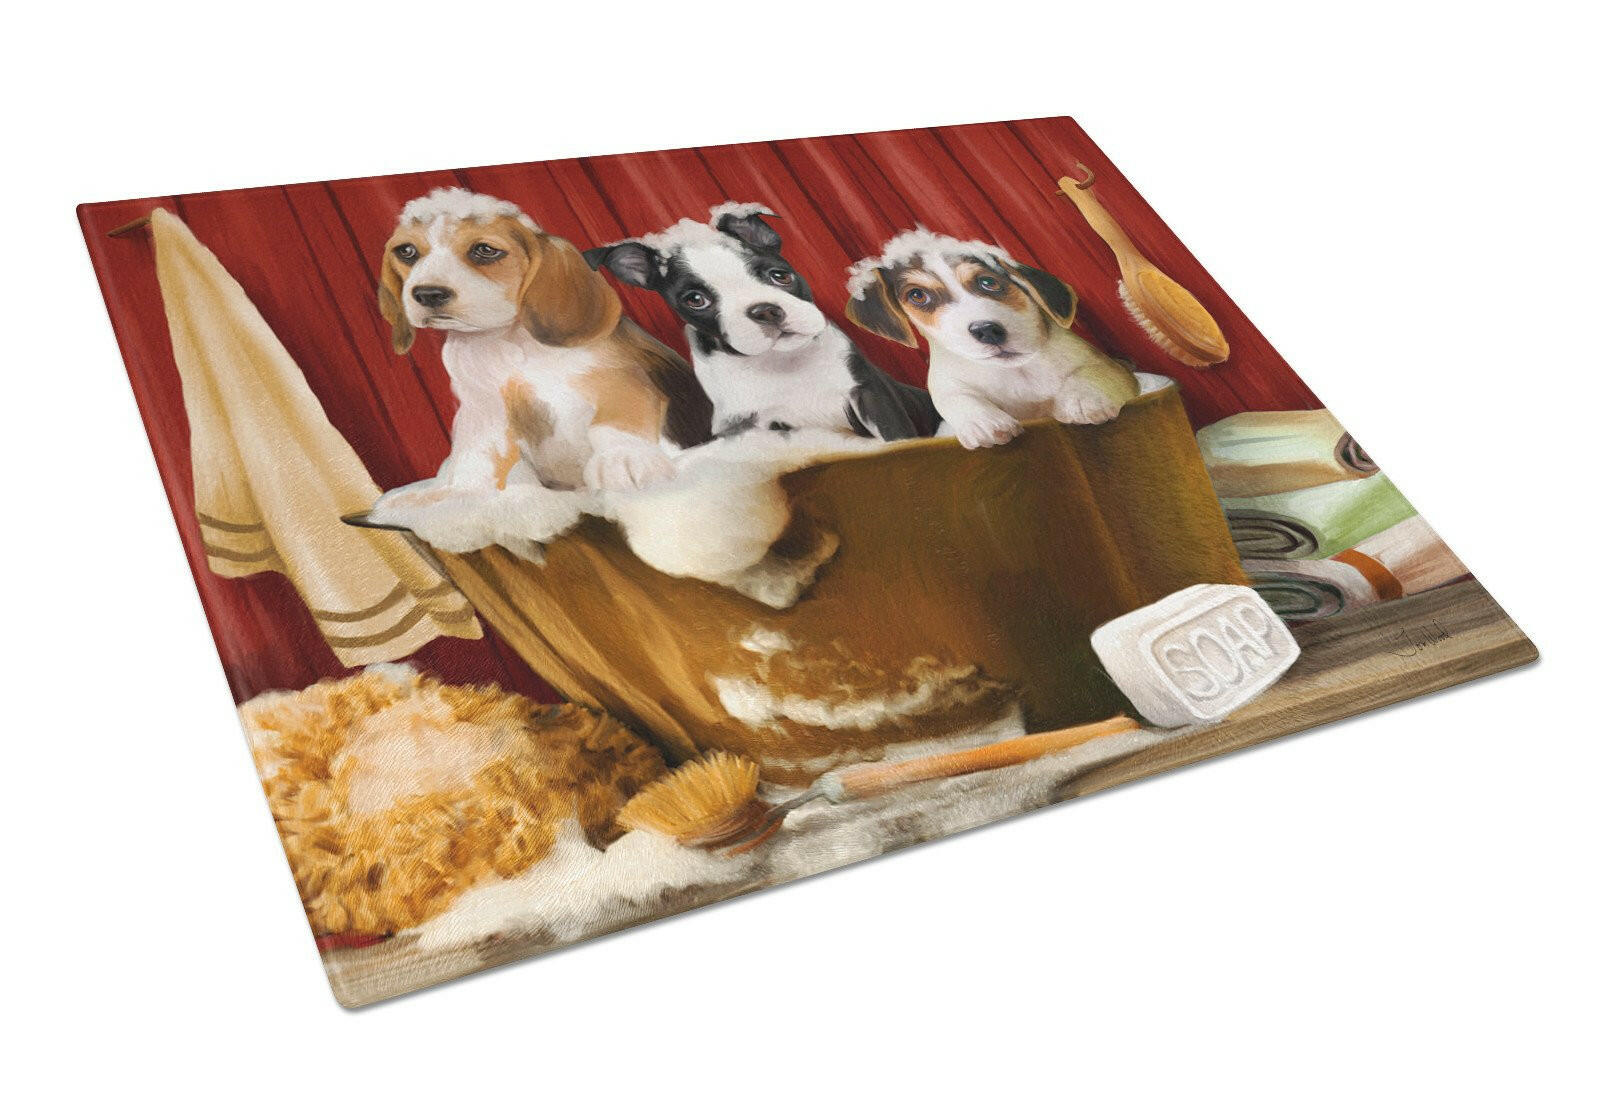 Beagle, Boston Terrier and Jack Russel in the Tub Glass Cutting Board Large PTW2047LCB by Caroline's Treasures